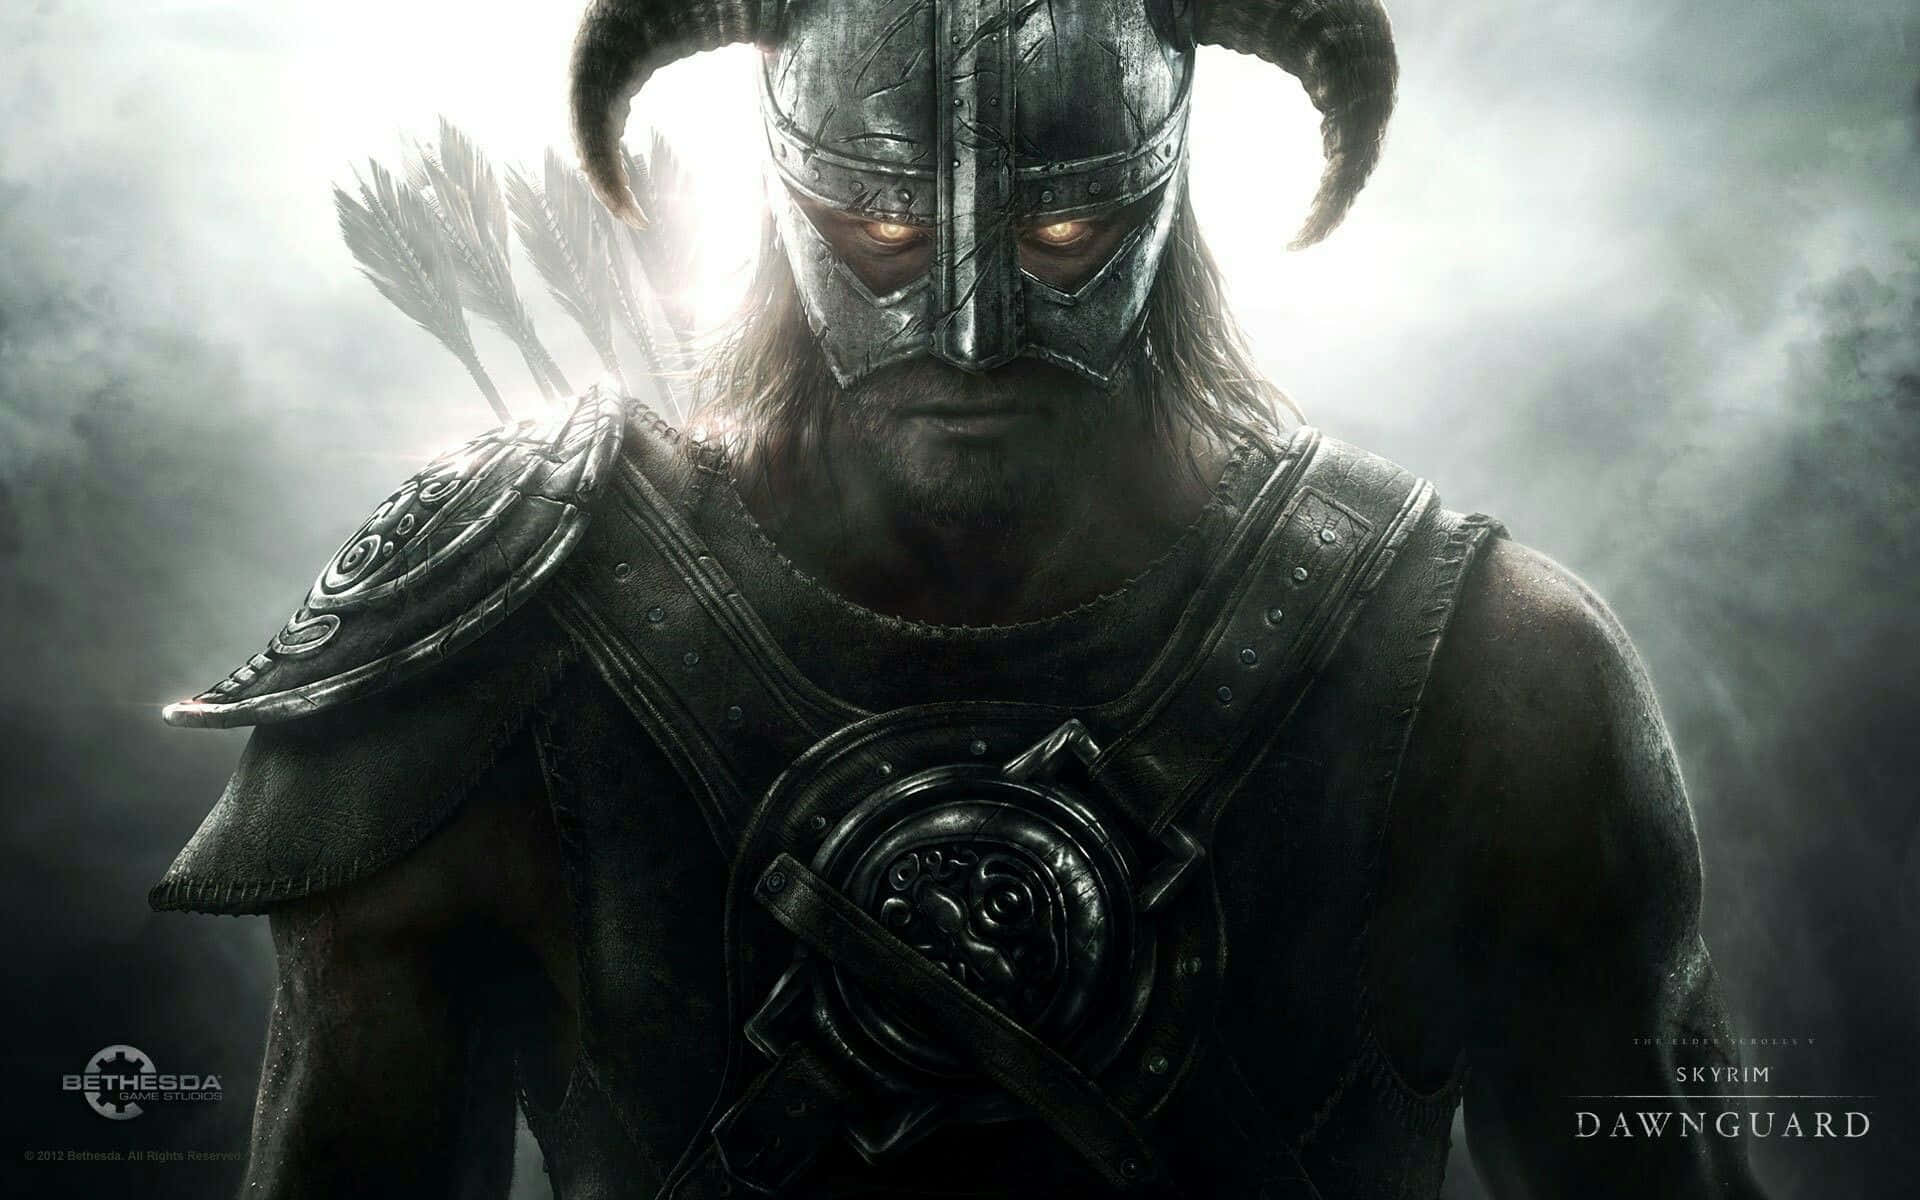 The Dovahkiin, Dragonborn Warrior, Harnessing The Power Of The Thu'um Against A Mighty Foe